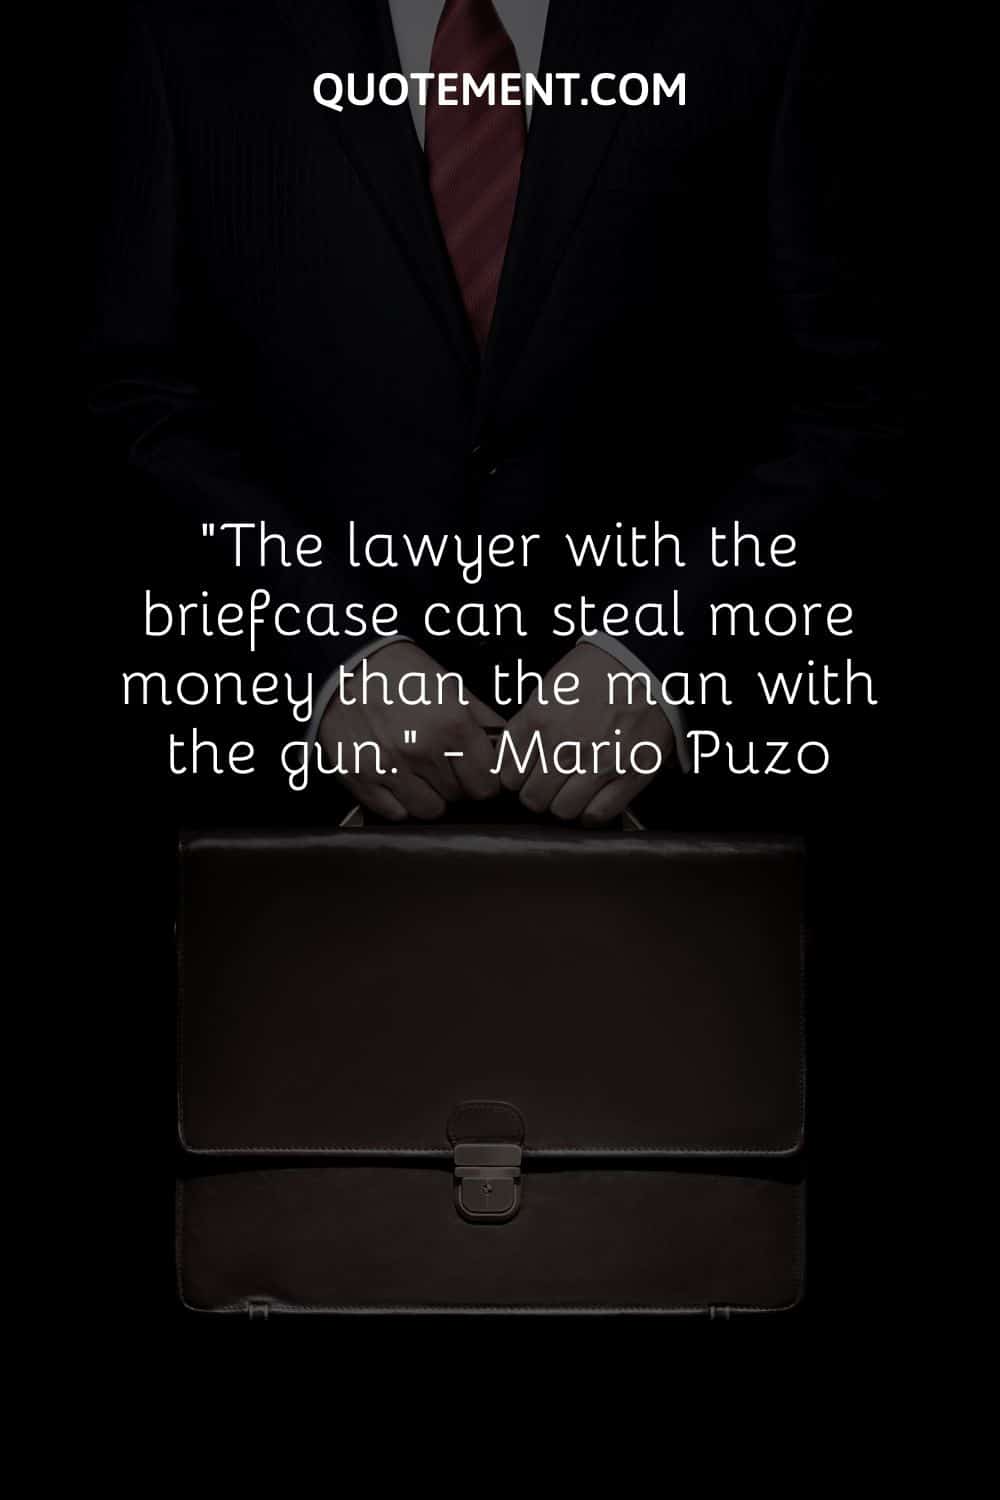 The lawyer with the briefcase can steal more money than the man with the gun